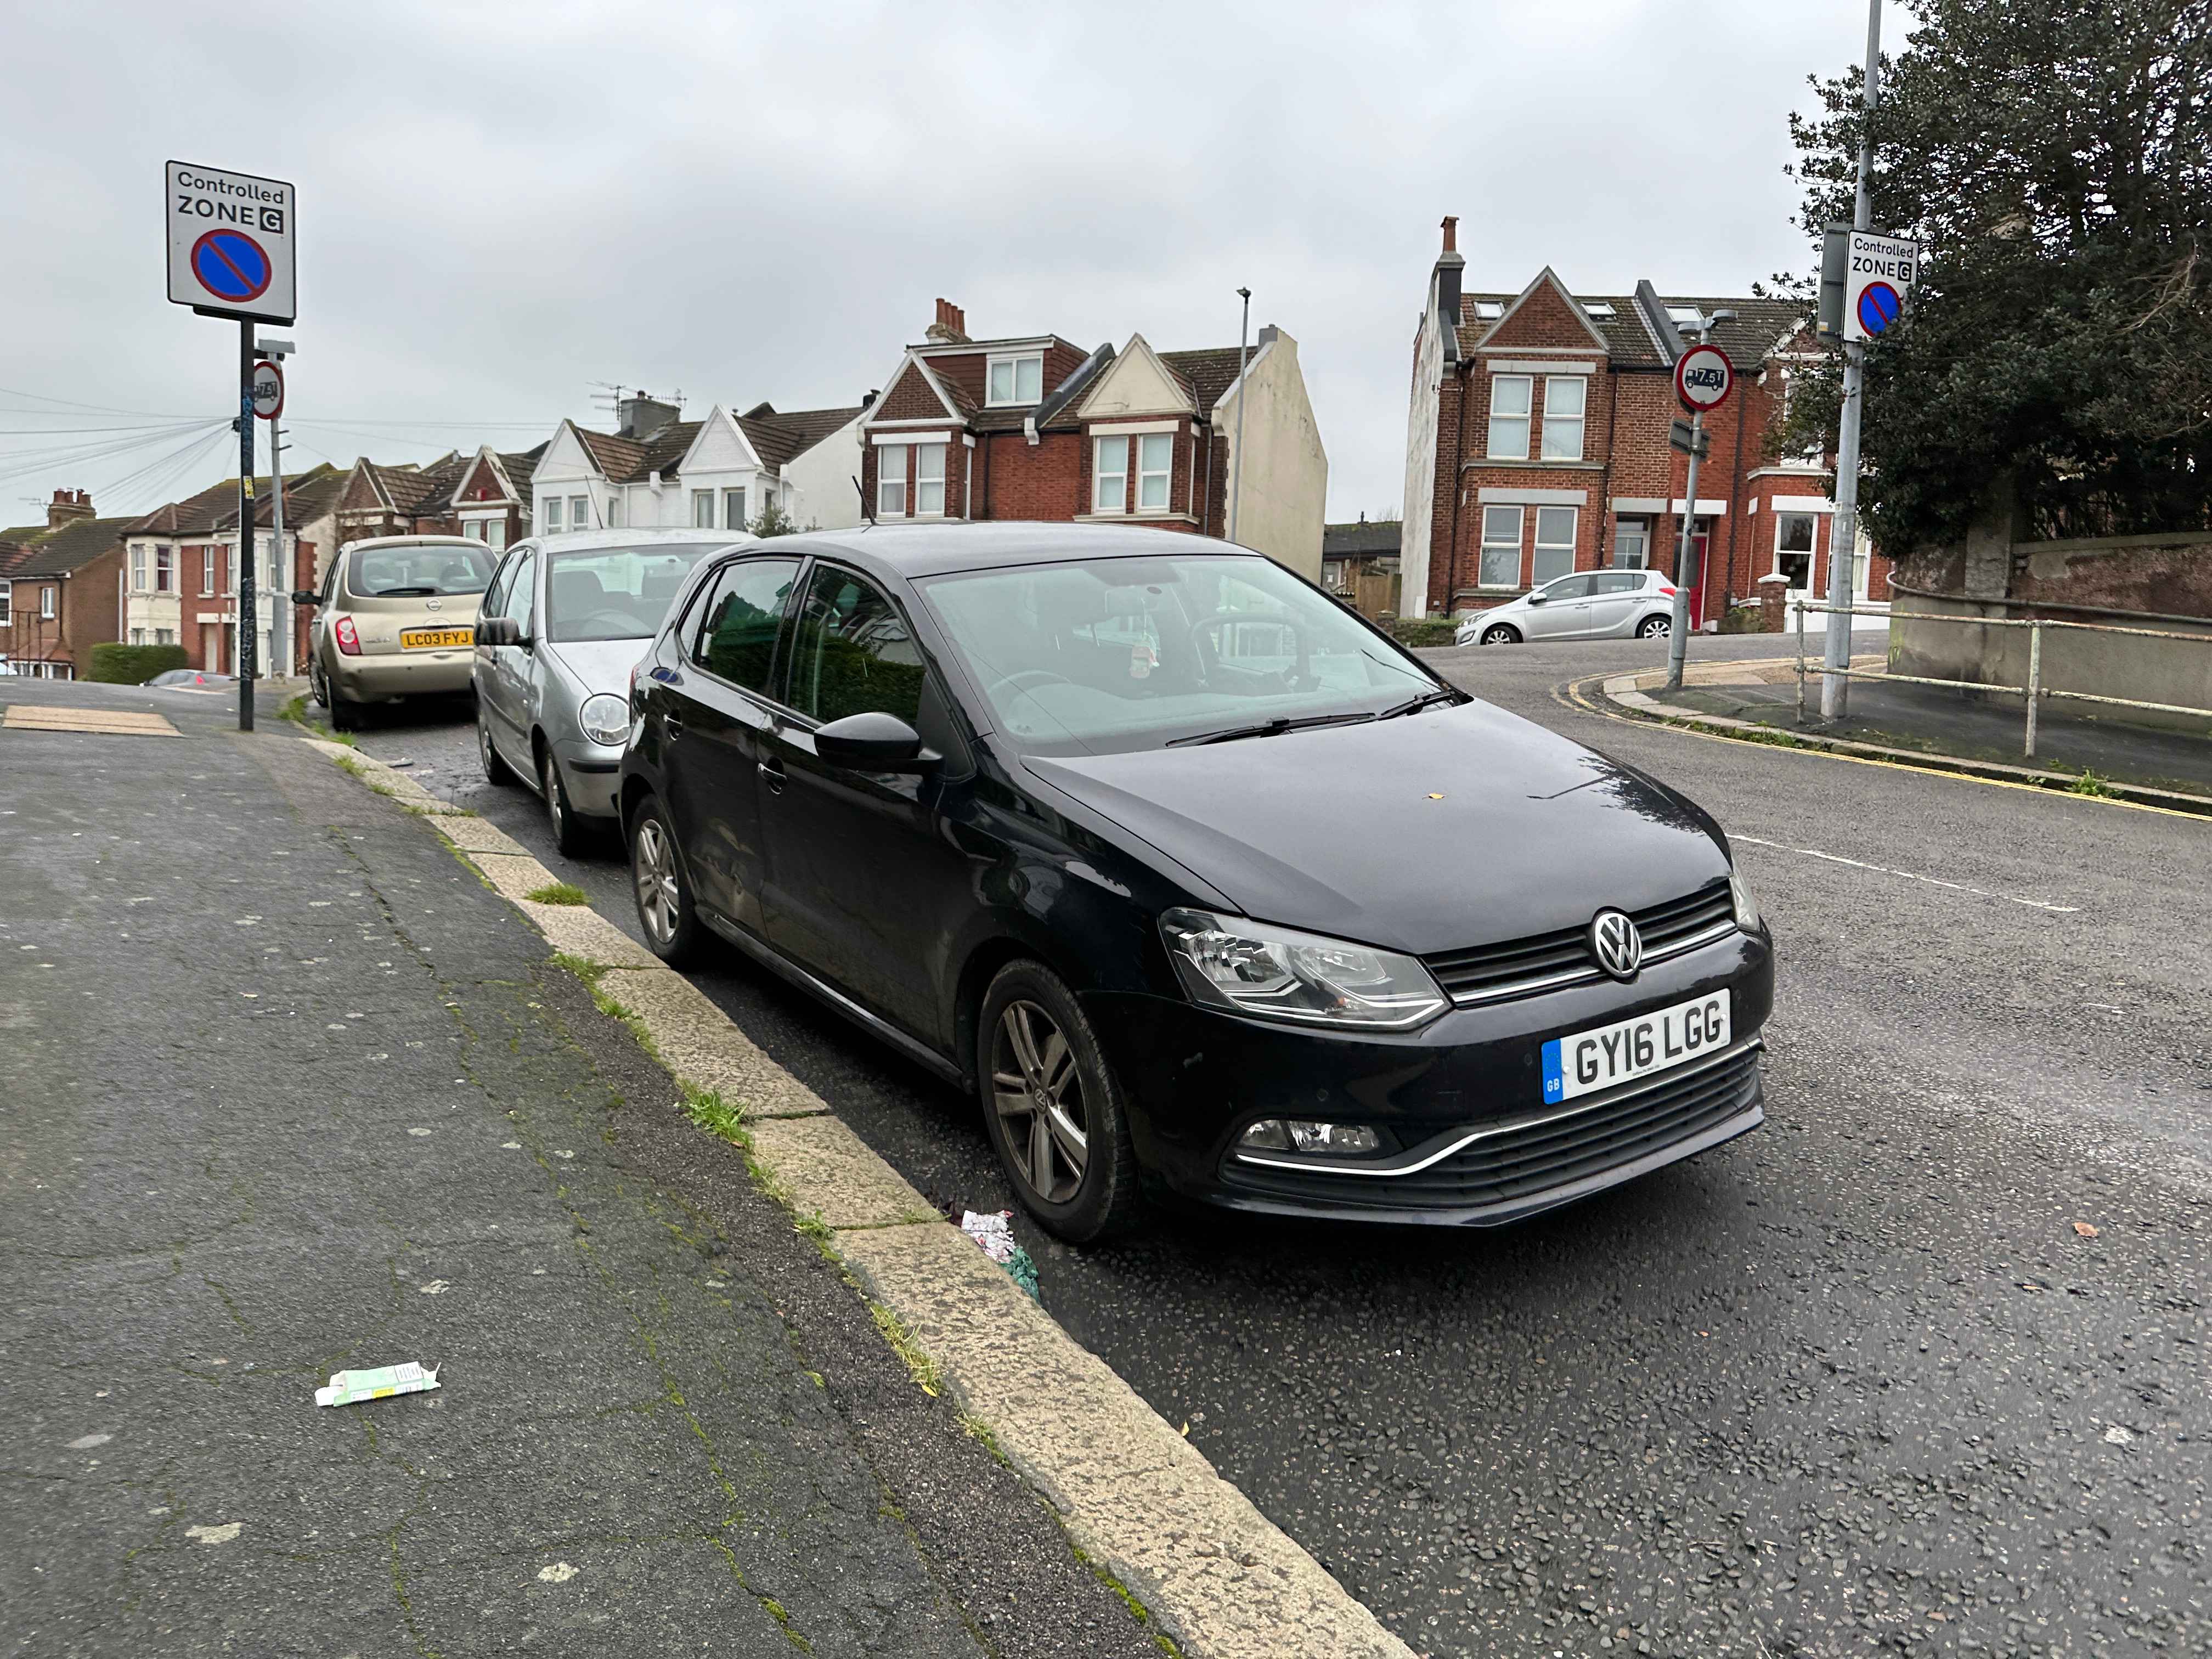 Photograph of GY16 LGG - a Black Volkswagen Polo parked in Hollingdean by a non-resident. The first of five photographs supplied by the residents of Hollingdean.